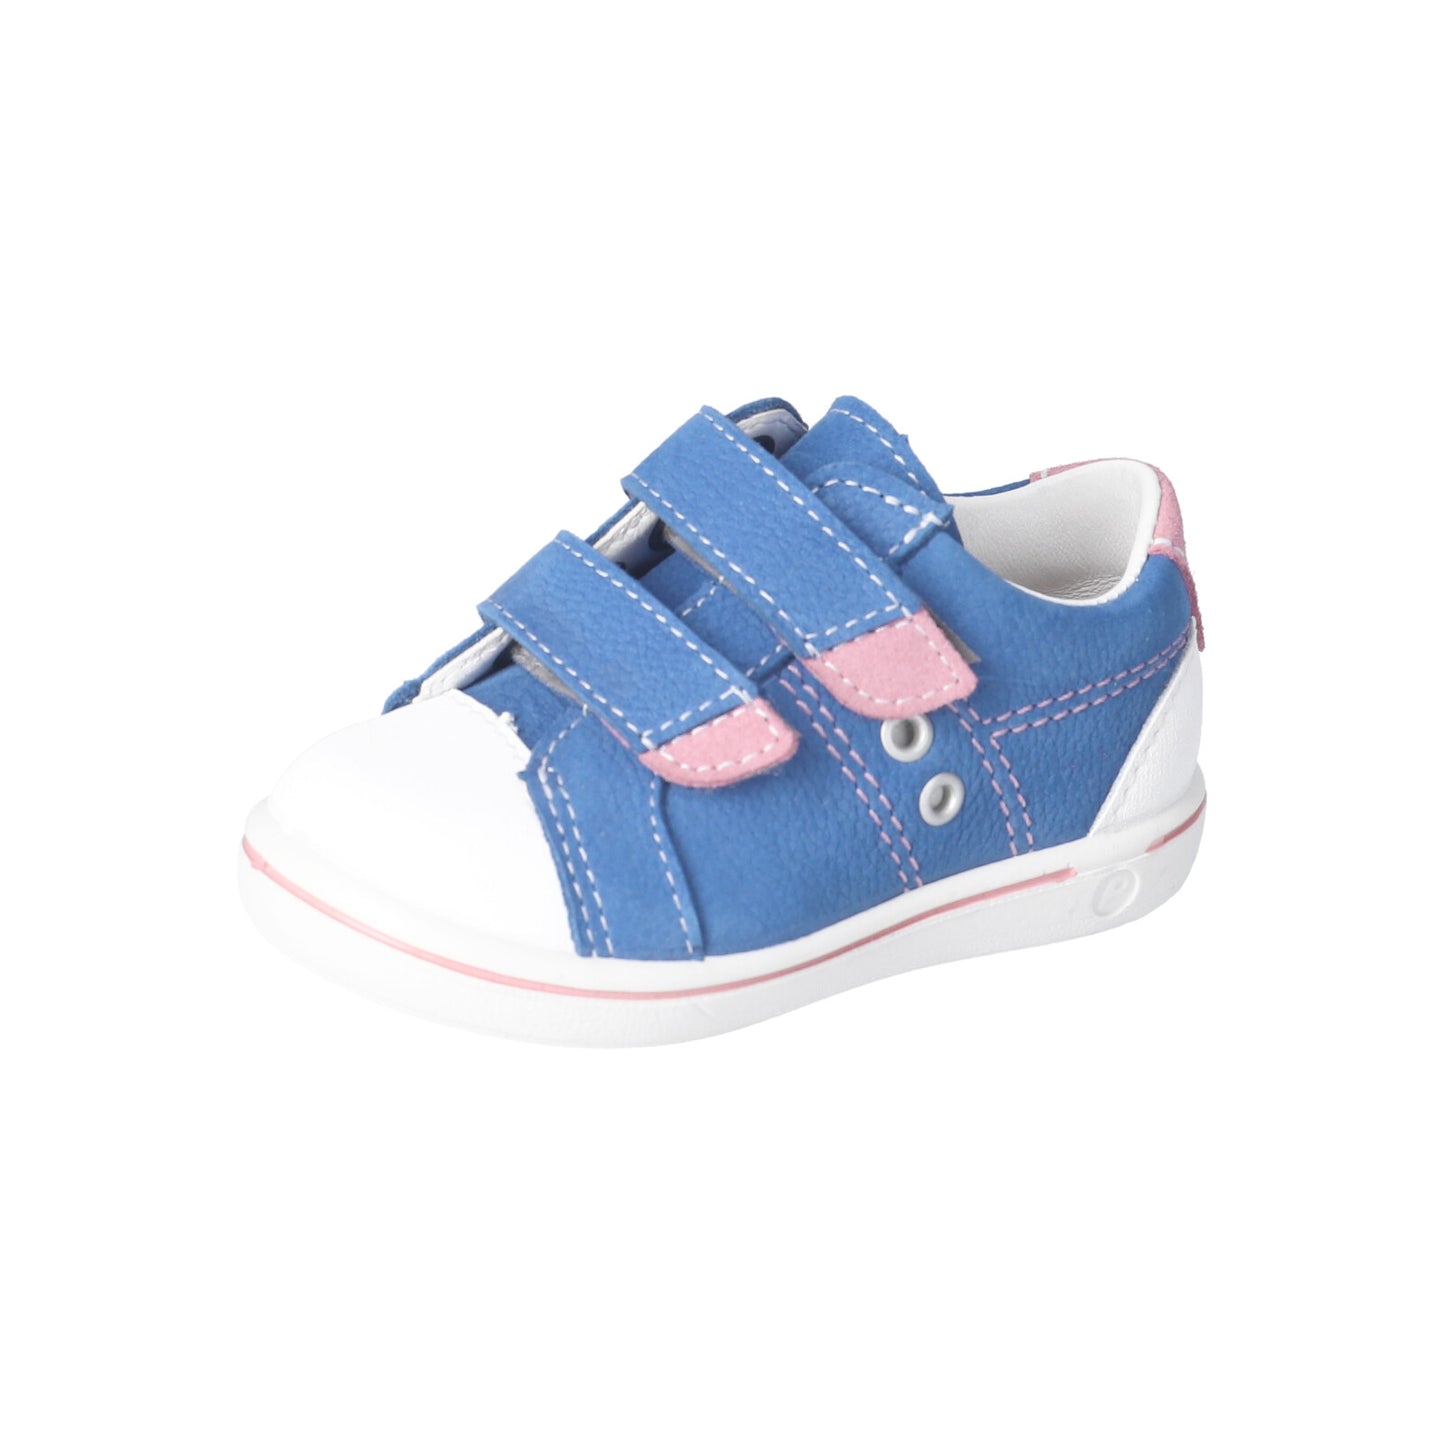 Nippy Leather Sneaker Shoe in Blue and Pink